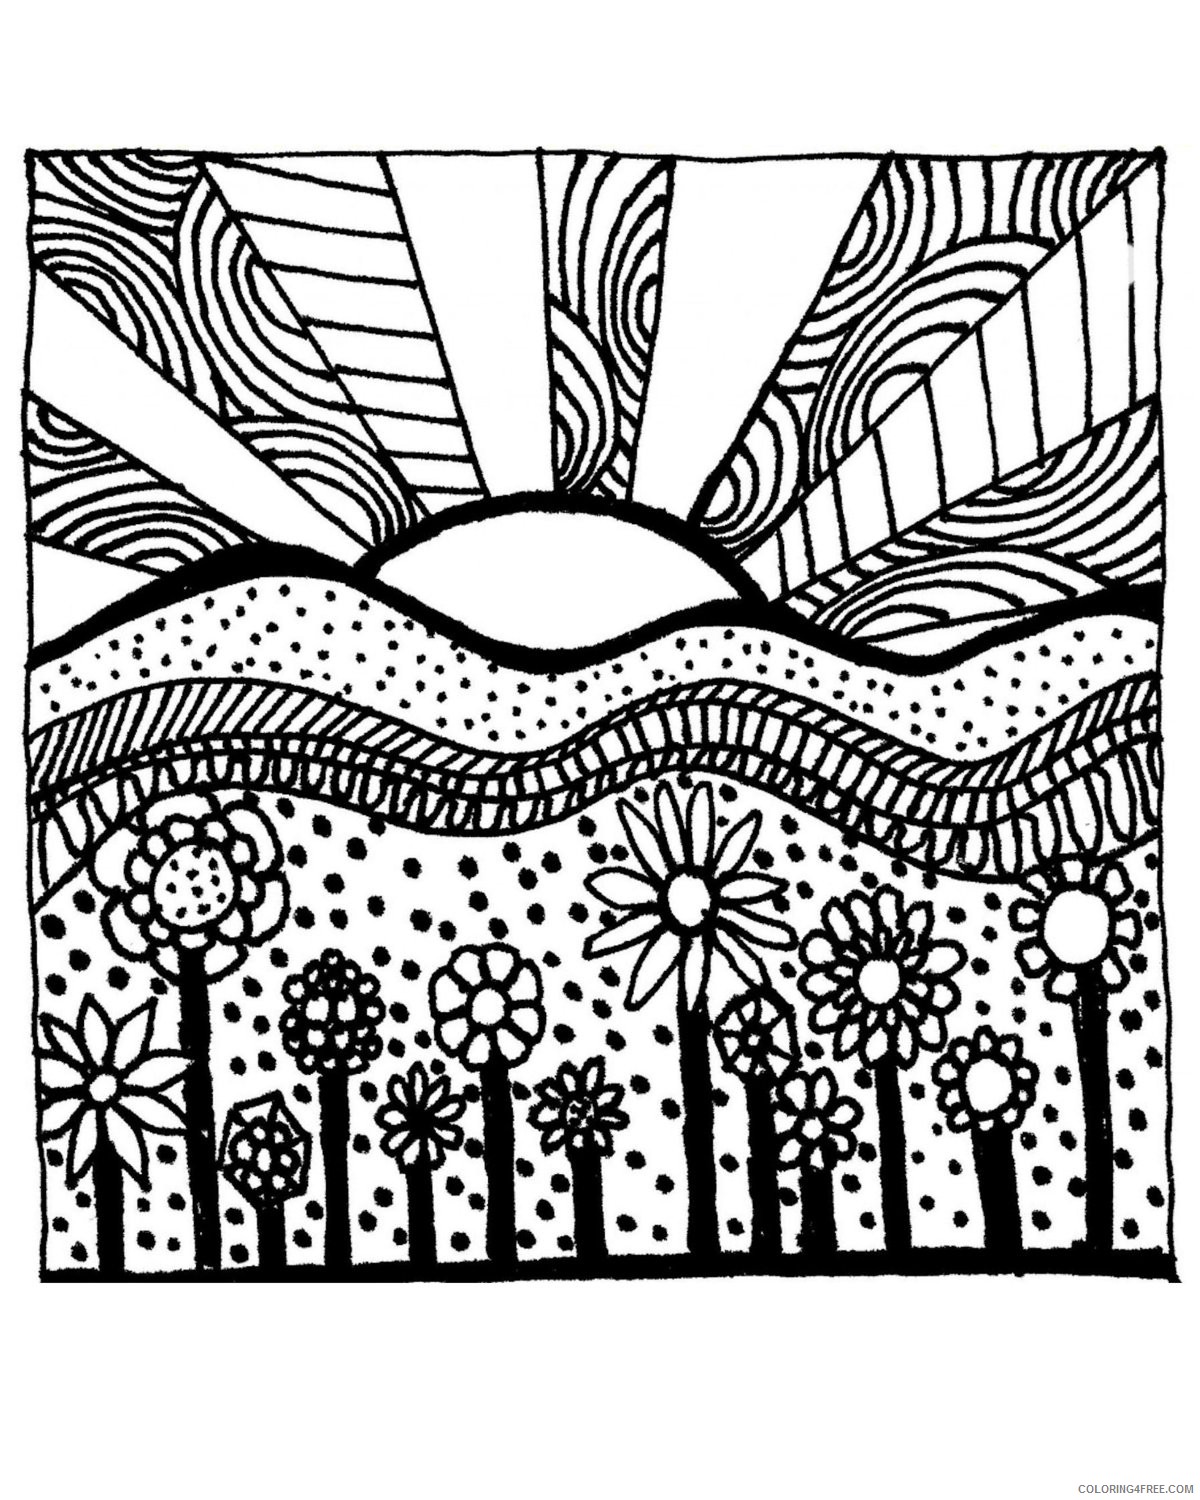 grown up coloring pages sunset Coloring4free - Coloring4Free.com